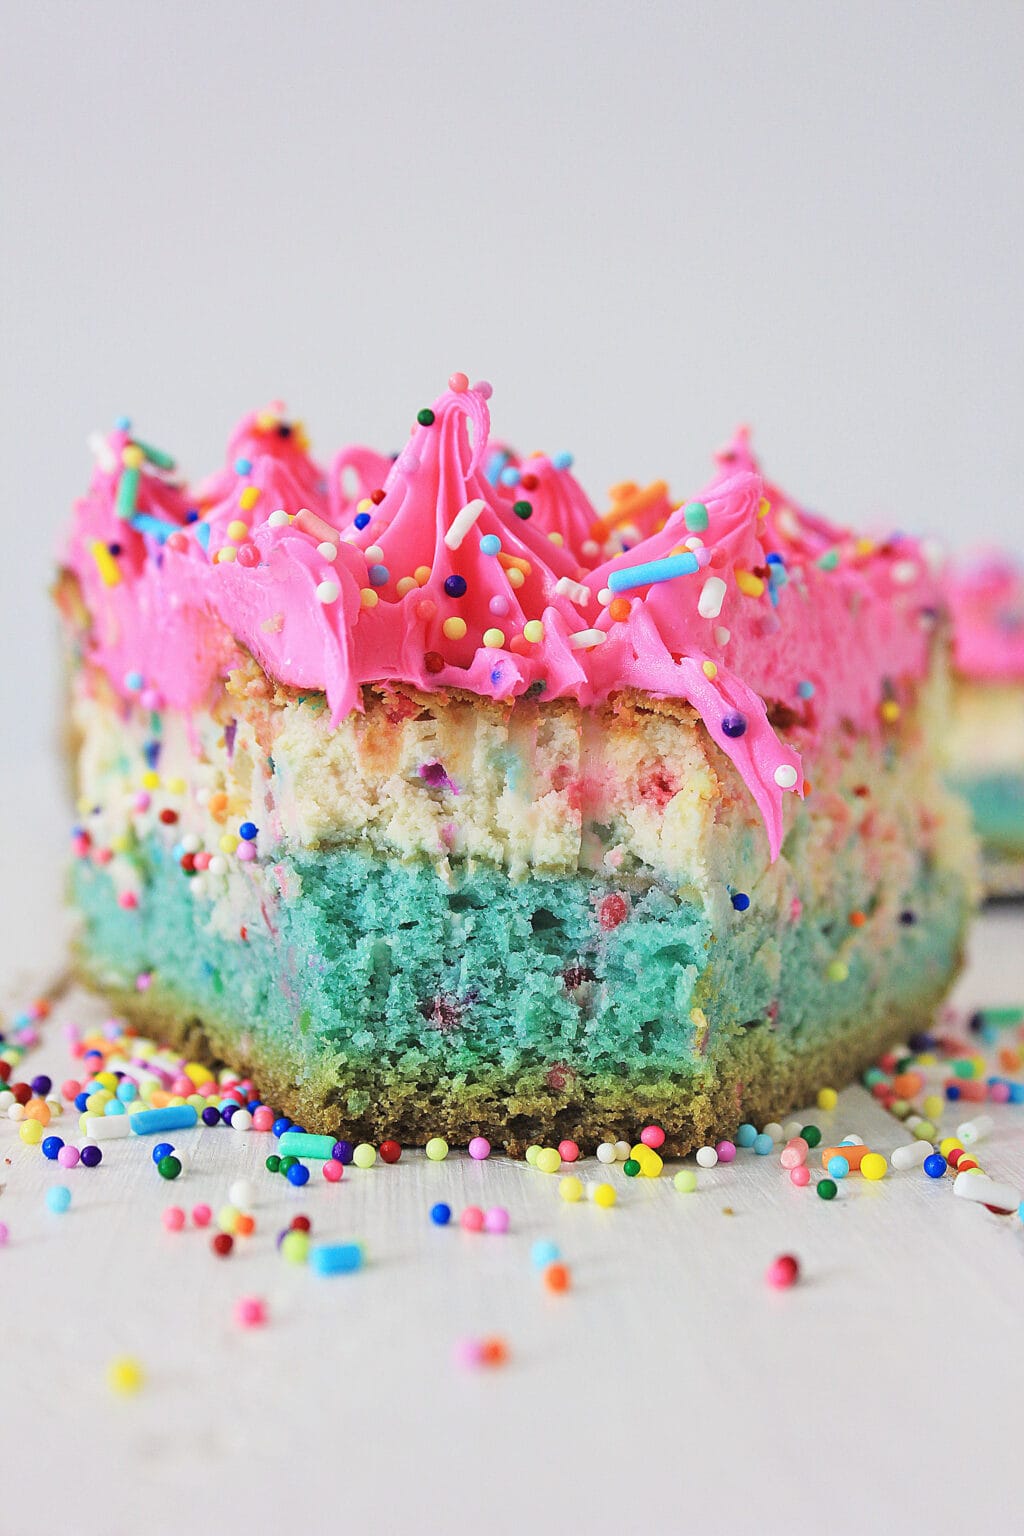 An upclose view of a piece of funfetti cheesecake with a bite taken out of it.